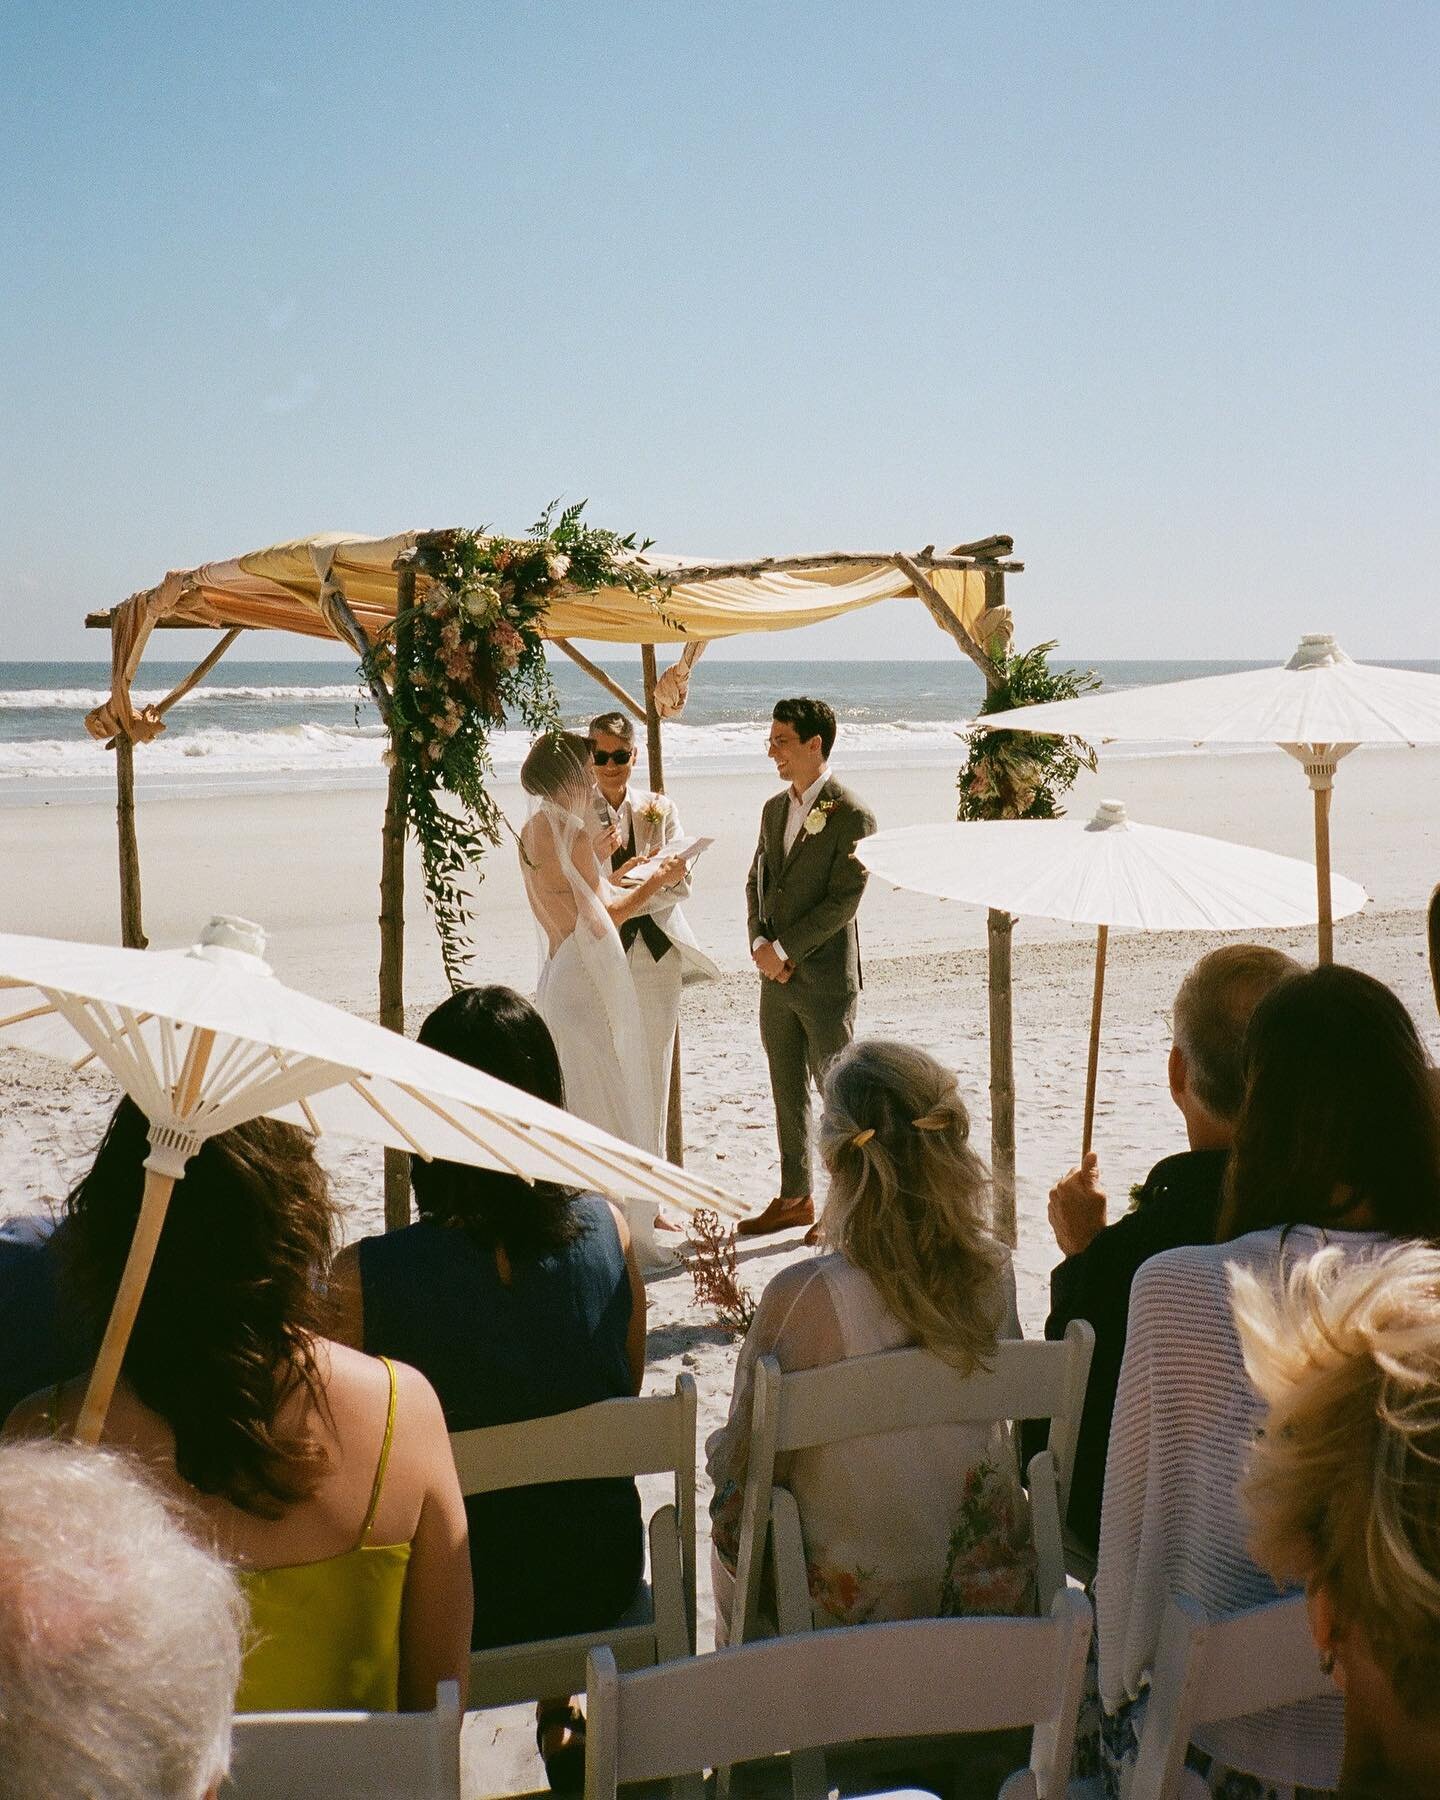 More film photos that have my heart from Leigh + Mattan&rsquo;s intimate beach wedding. Clear blue skies, a golden sunshine glow and seaside October breeze set the scene for the perfect Sunday wedding. No fear of harsh light over here 🌞🌞🌞